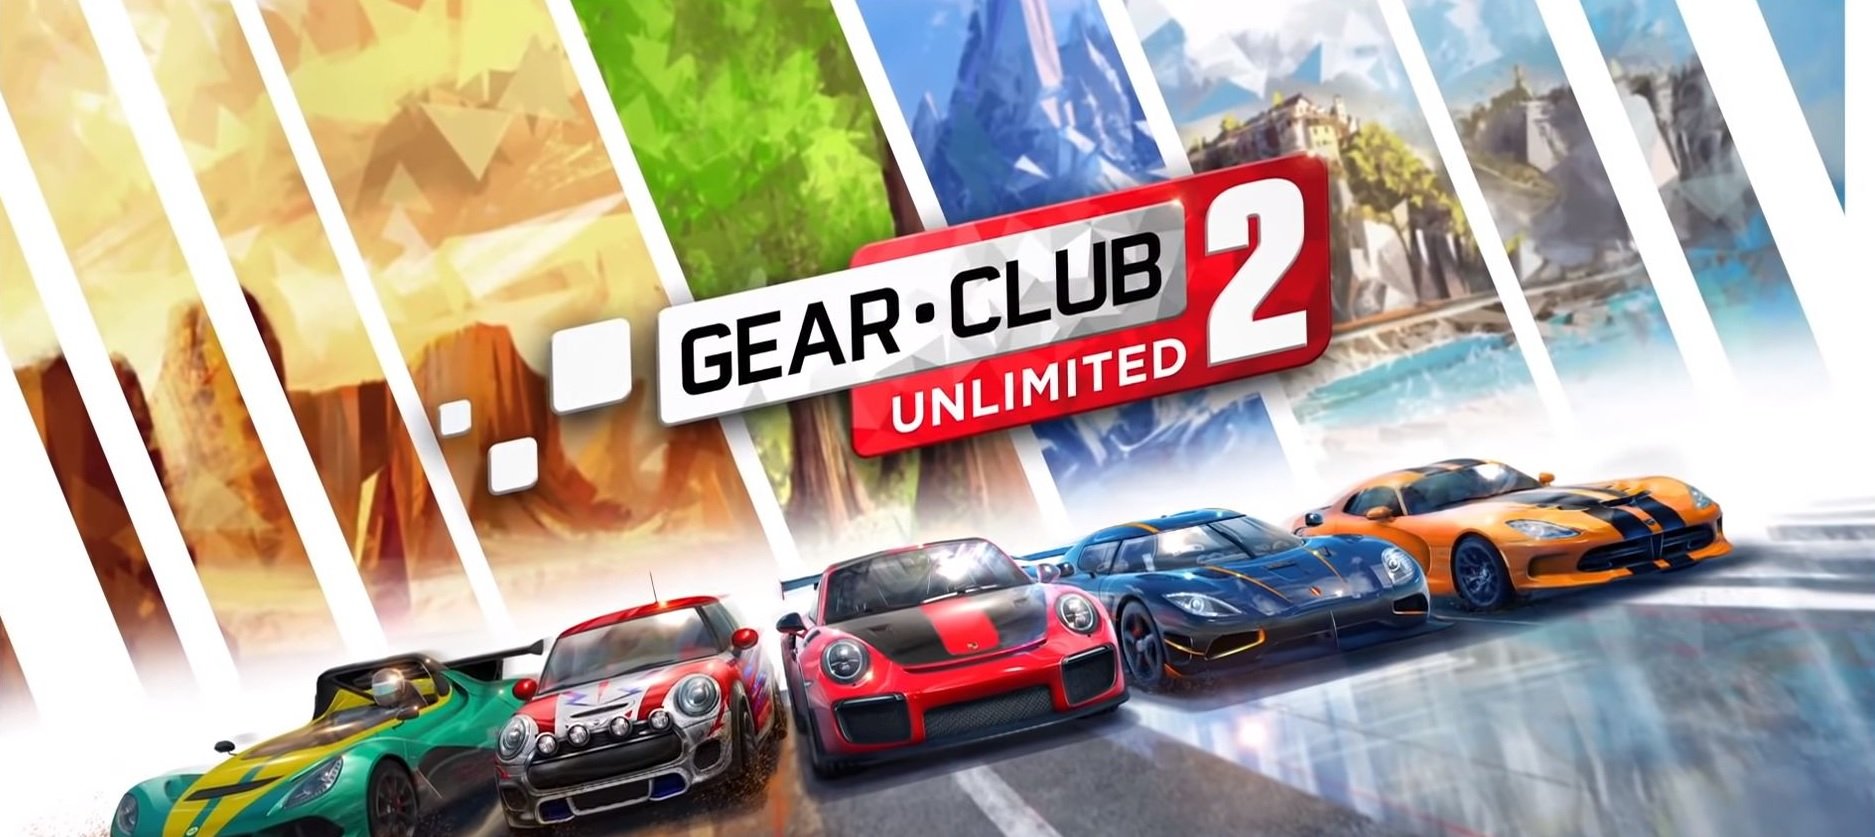 Review: Gear Club Unlimited 2 doesn’t provide the racing experience Nintendo Switch players deserve